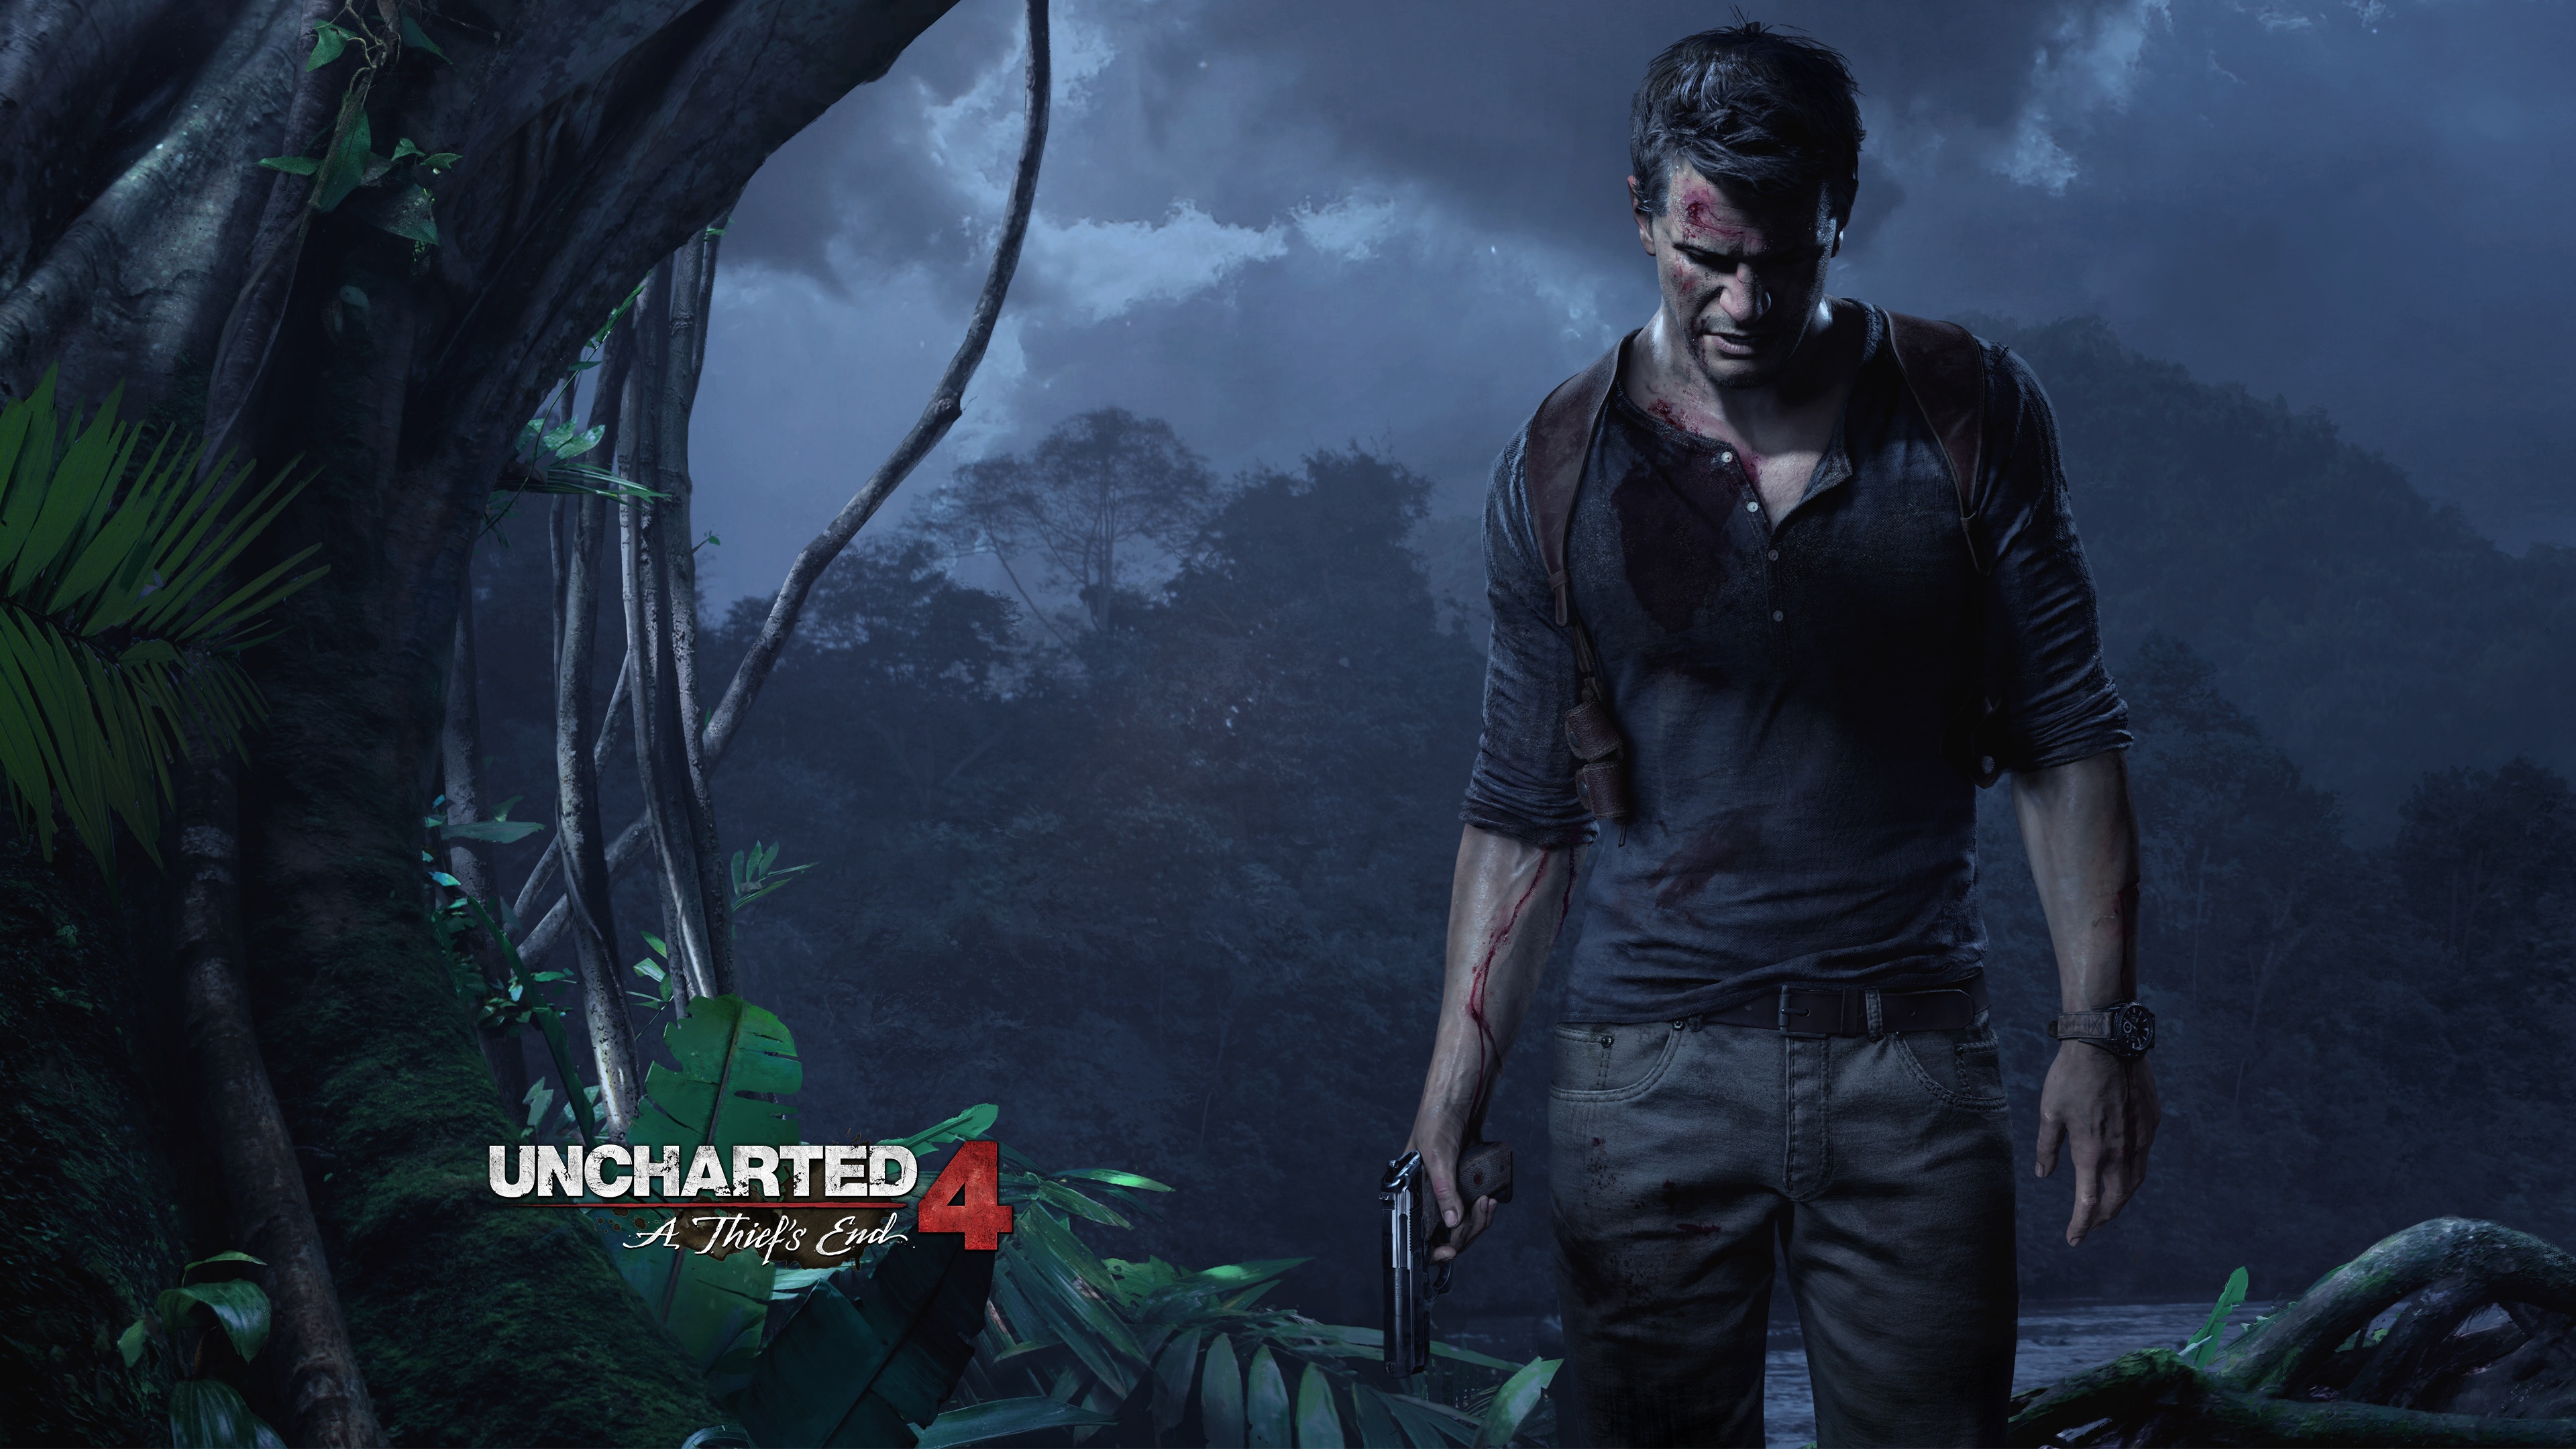 uncharted 4 a thiefs end game 3840 x 2160 83